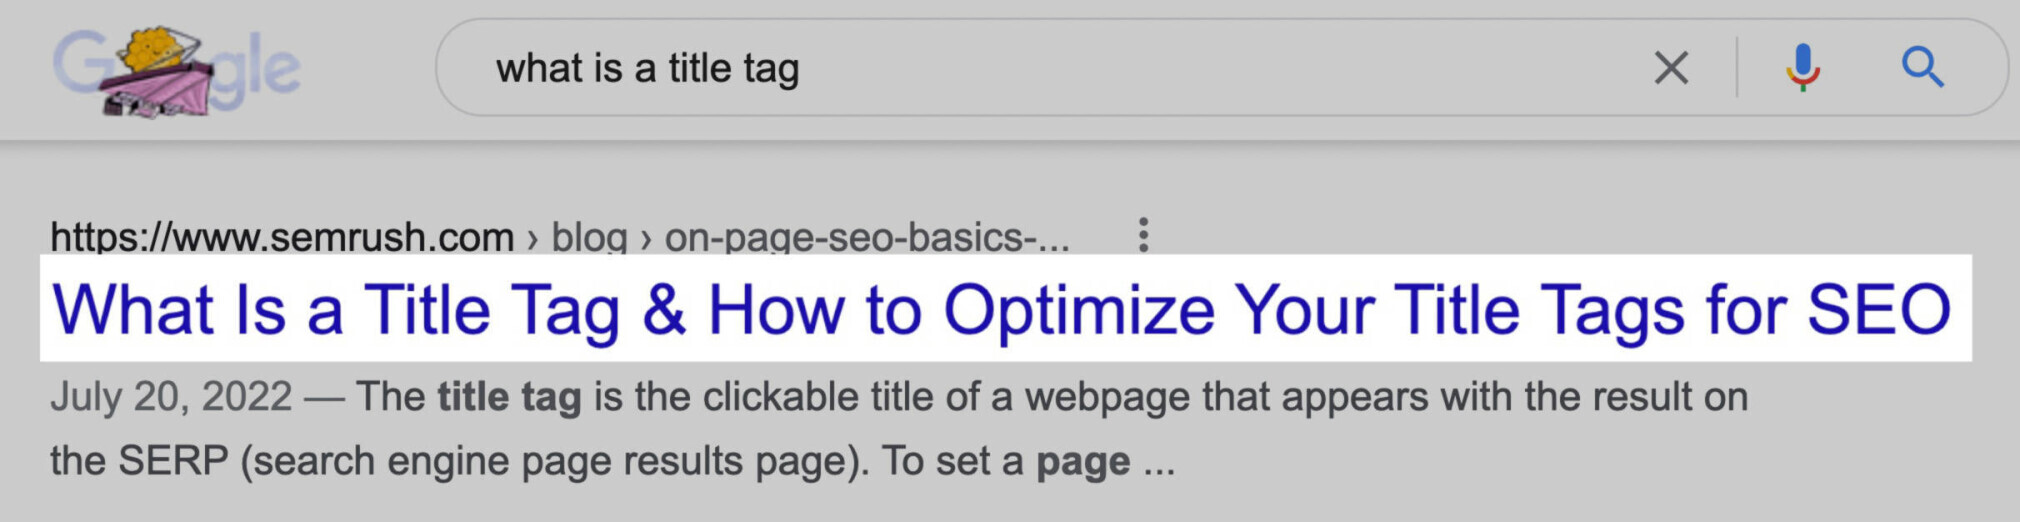 Title tag on Google SERP for the article "What Is a Title Tag & How to Optimize Your Title Tags for SEO"